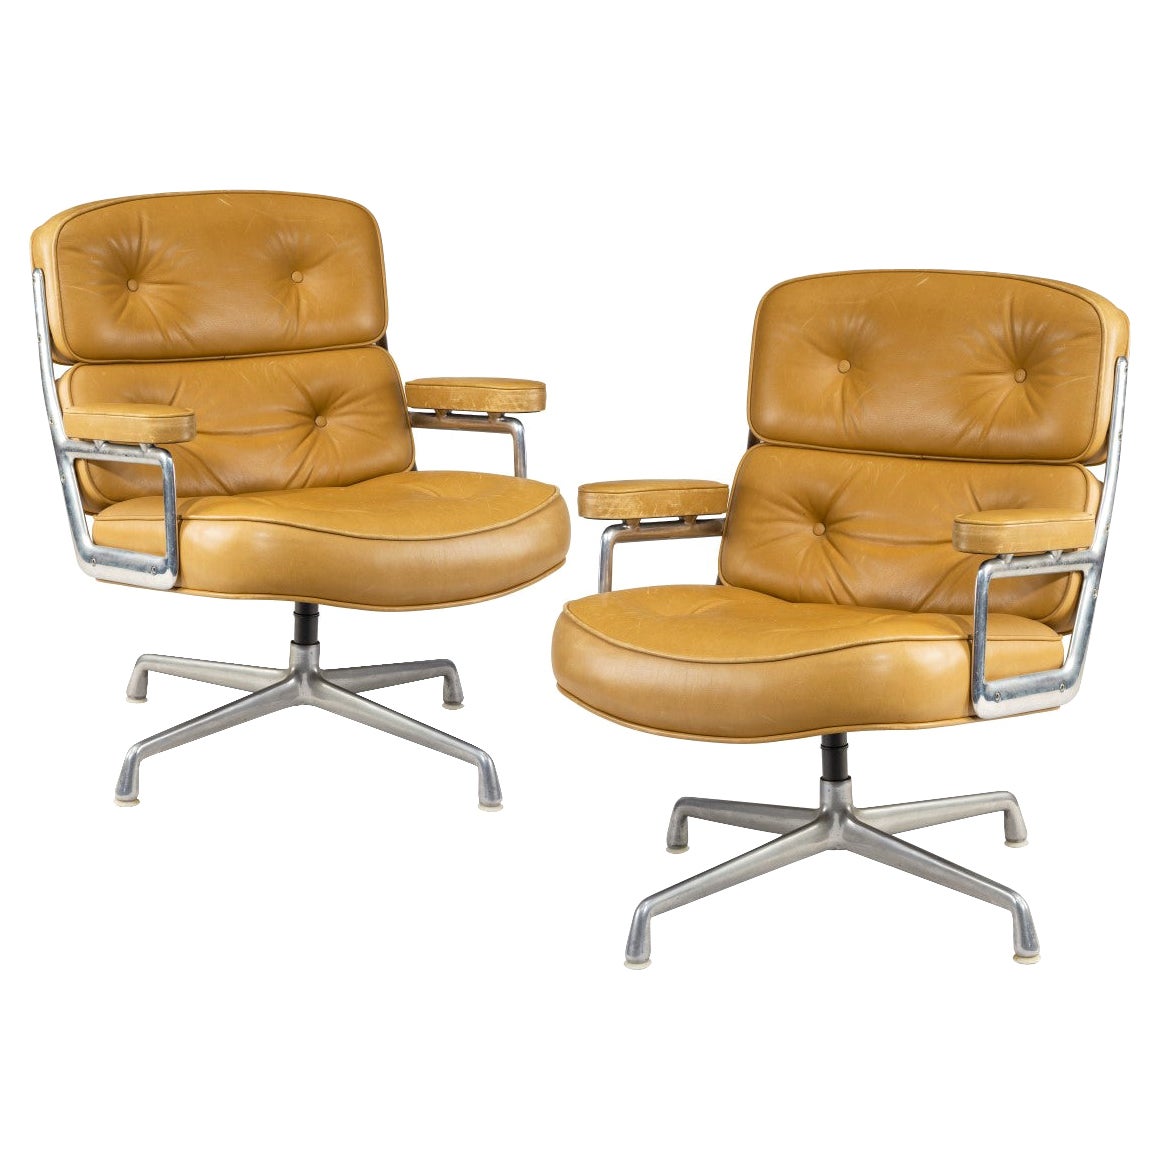 A pair of swivel “Time Life Chairs” designed by Charles & Ray Eames for Herman M